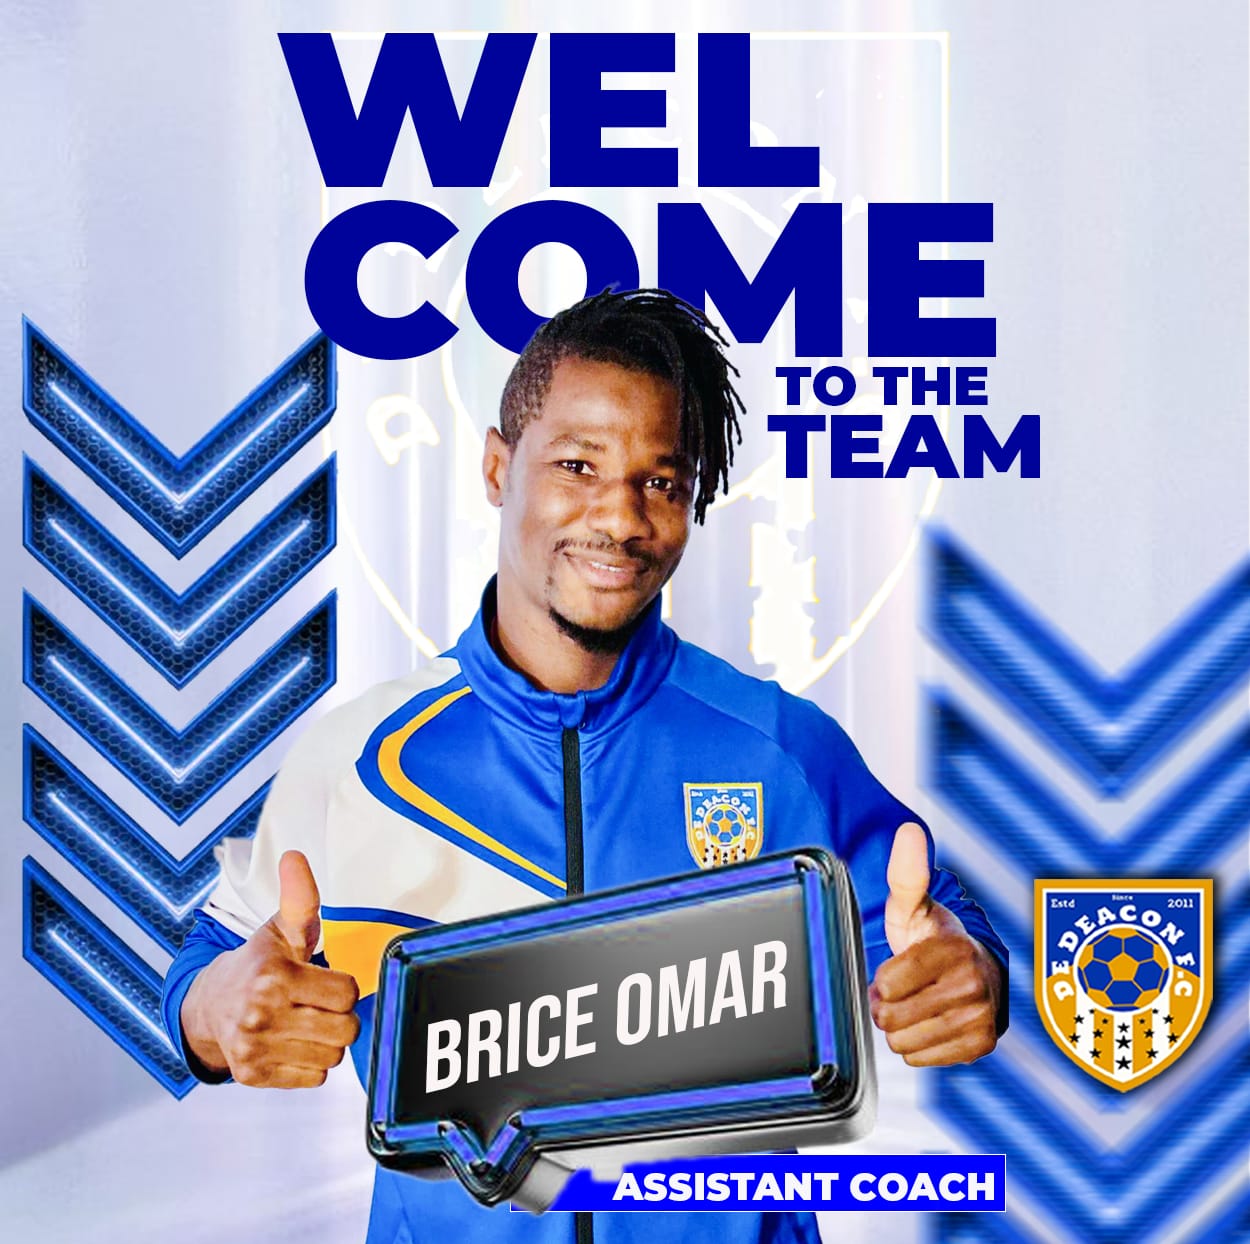 Welcoming coach Brice